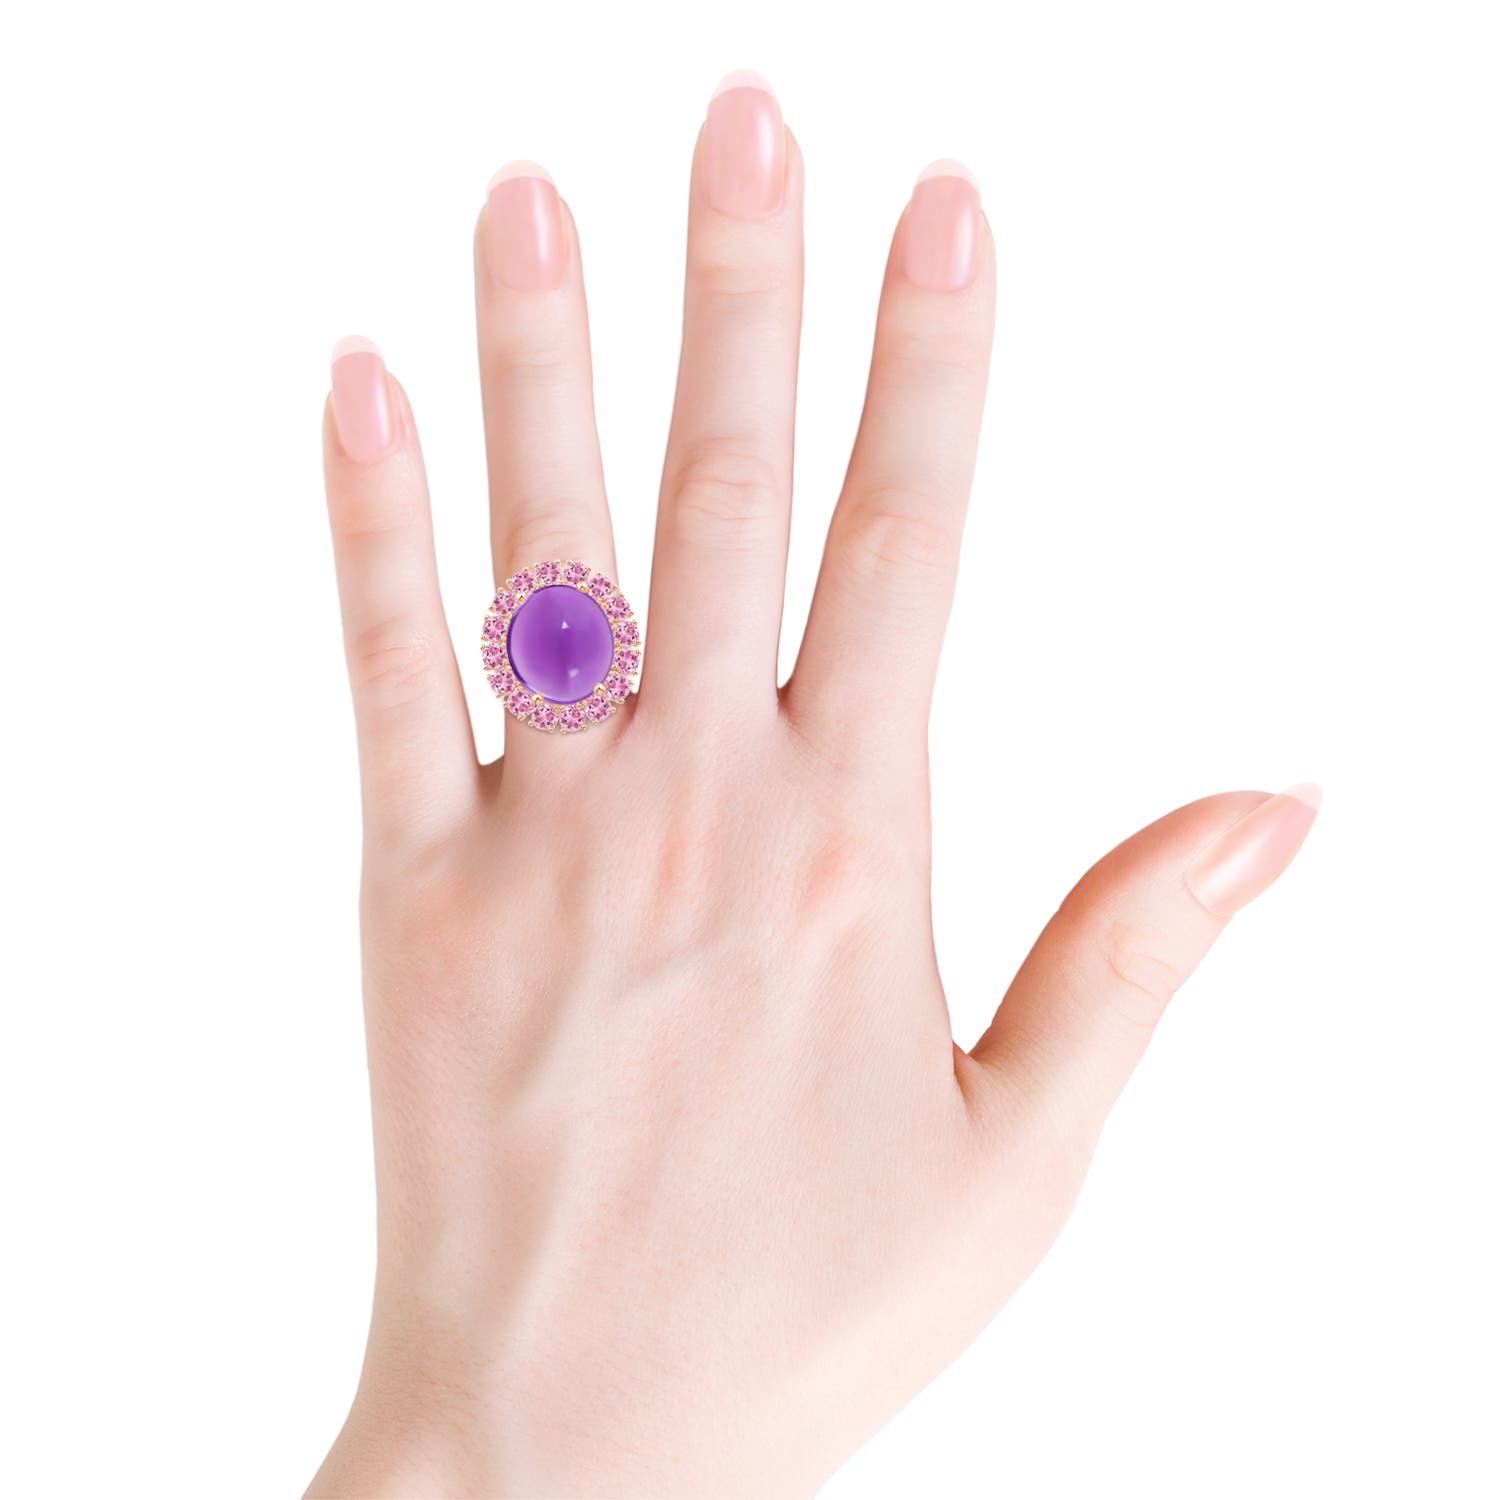 AA - Amethyst / 13.56 CT / 14 KT Rose Gold